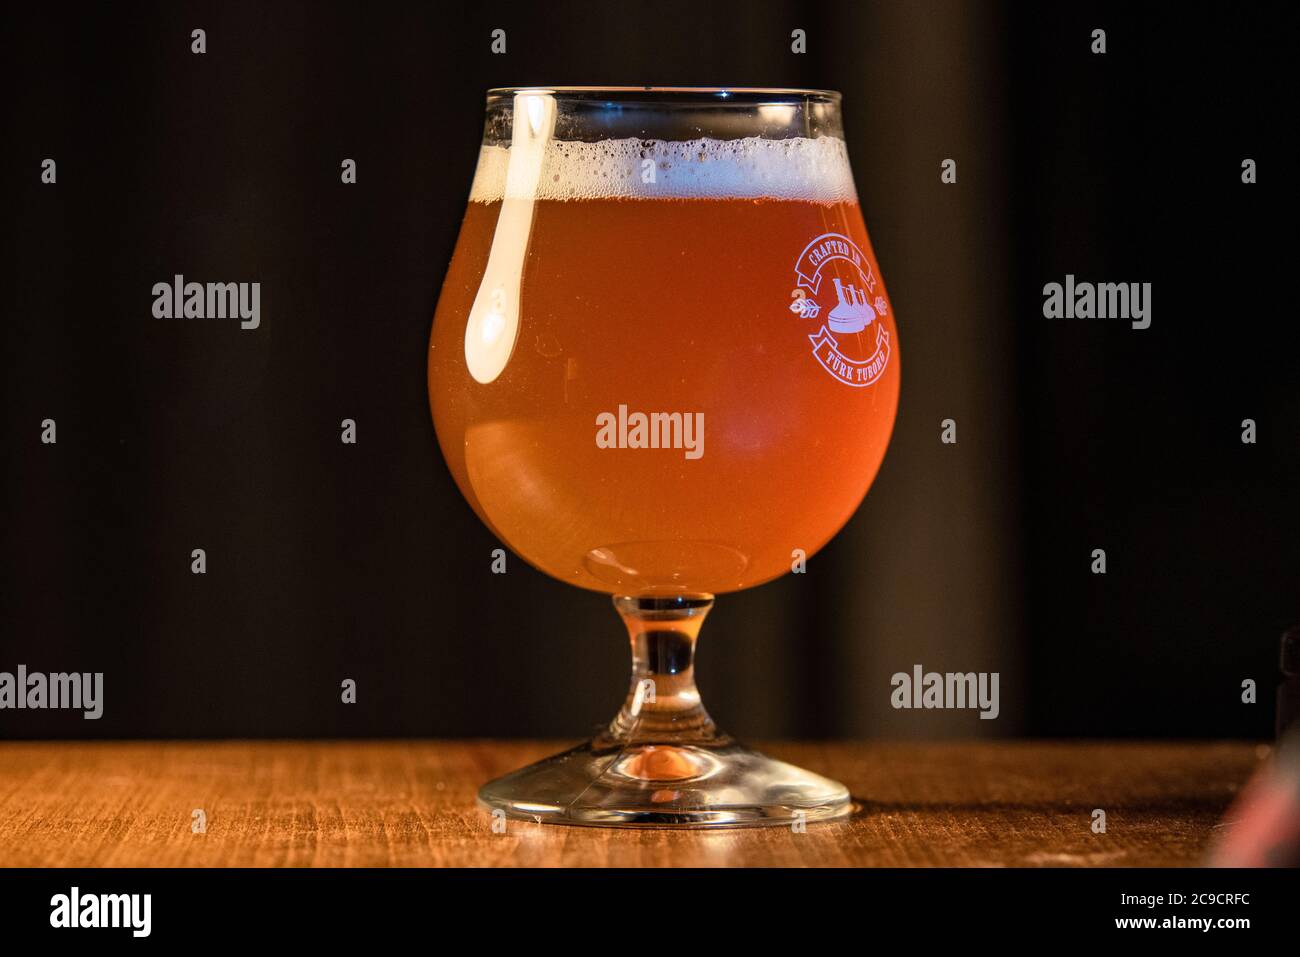 ANKARA, TURKEY - January 24, 2019: An example of homebrewed beer by a Turkish brewer. Homebrewing is on the rise in Turkey as a result of increasing p Stock Photo